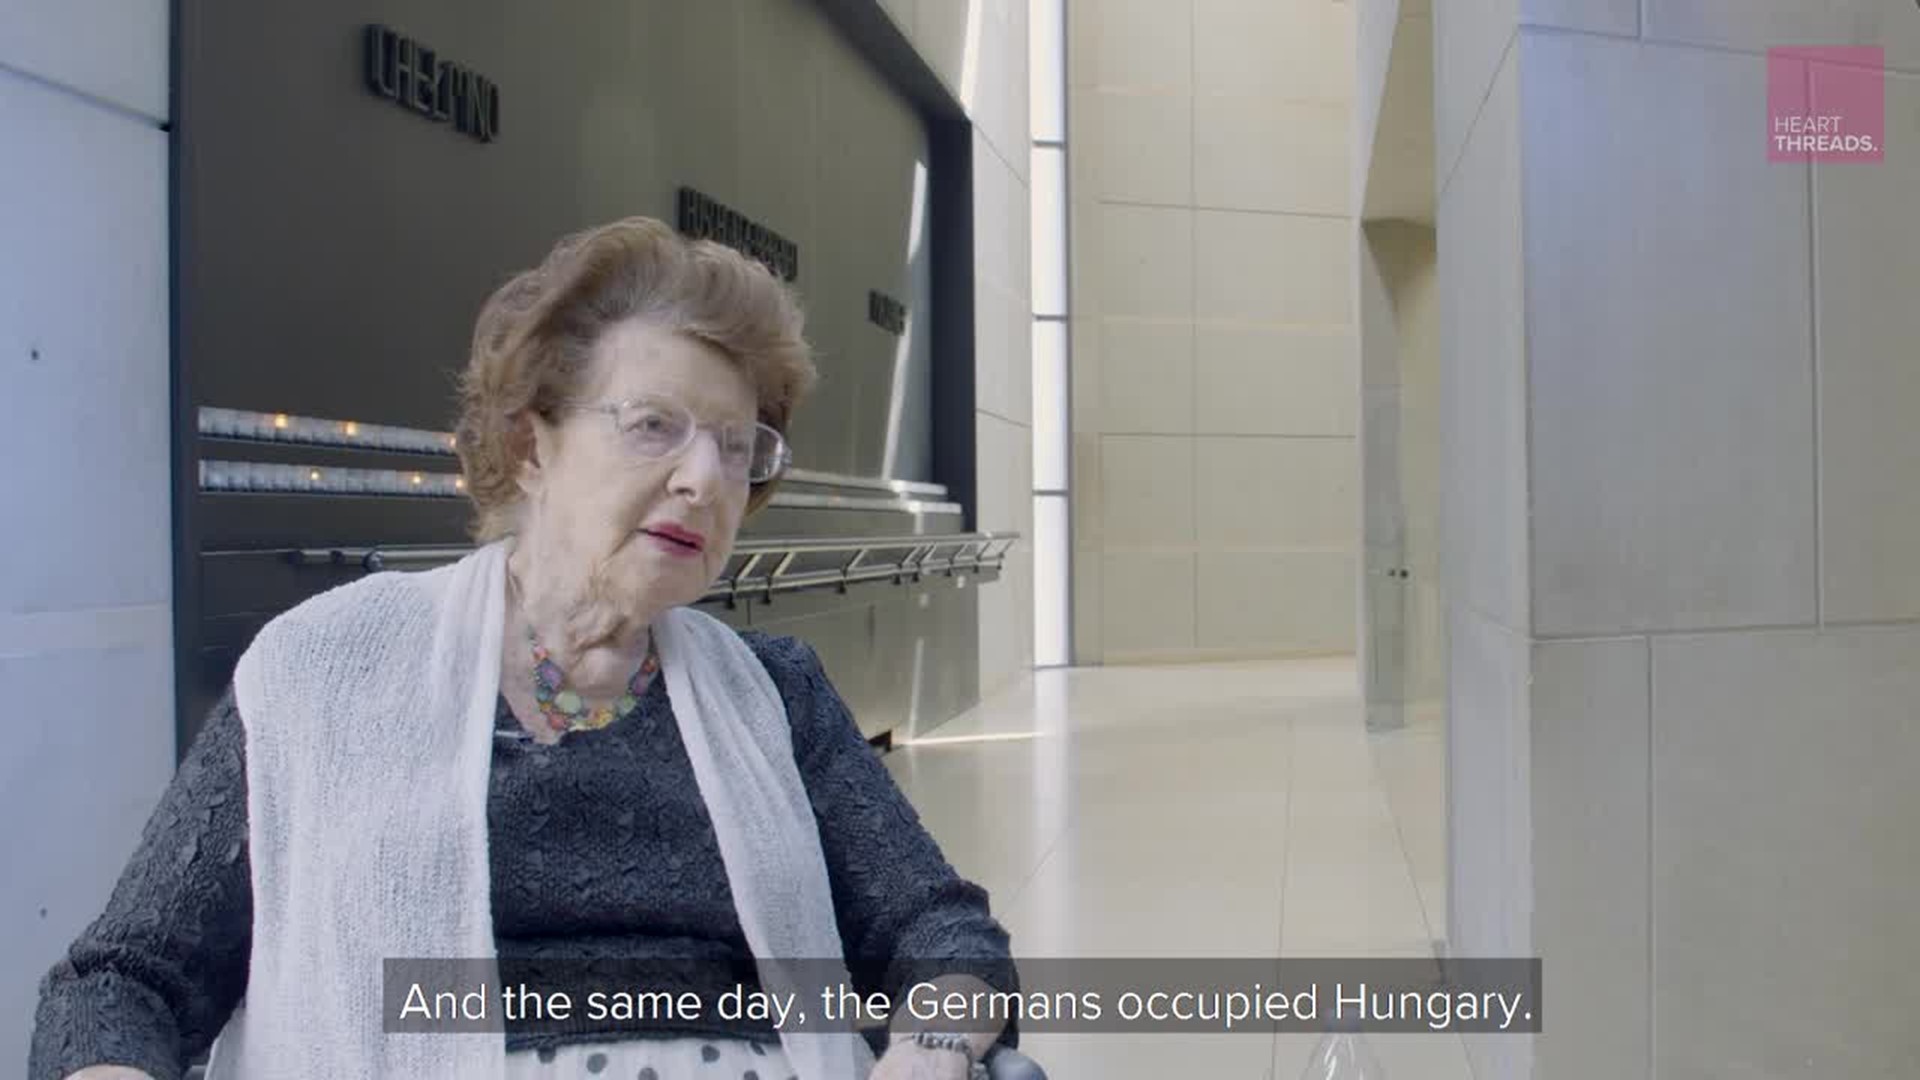 Agi Geva stood in line with her younger sister after arriving at the Auschwitz concentration camp in German-occupied Poland when their mother Rozsa returned. Rozsa had walked ahead in the line to figure out what was going on. When she came back, she had a request for her girls: lie about their ages.